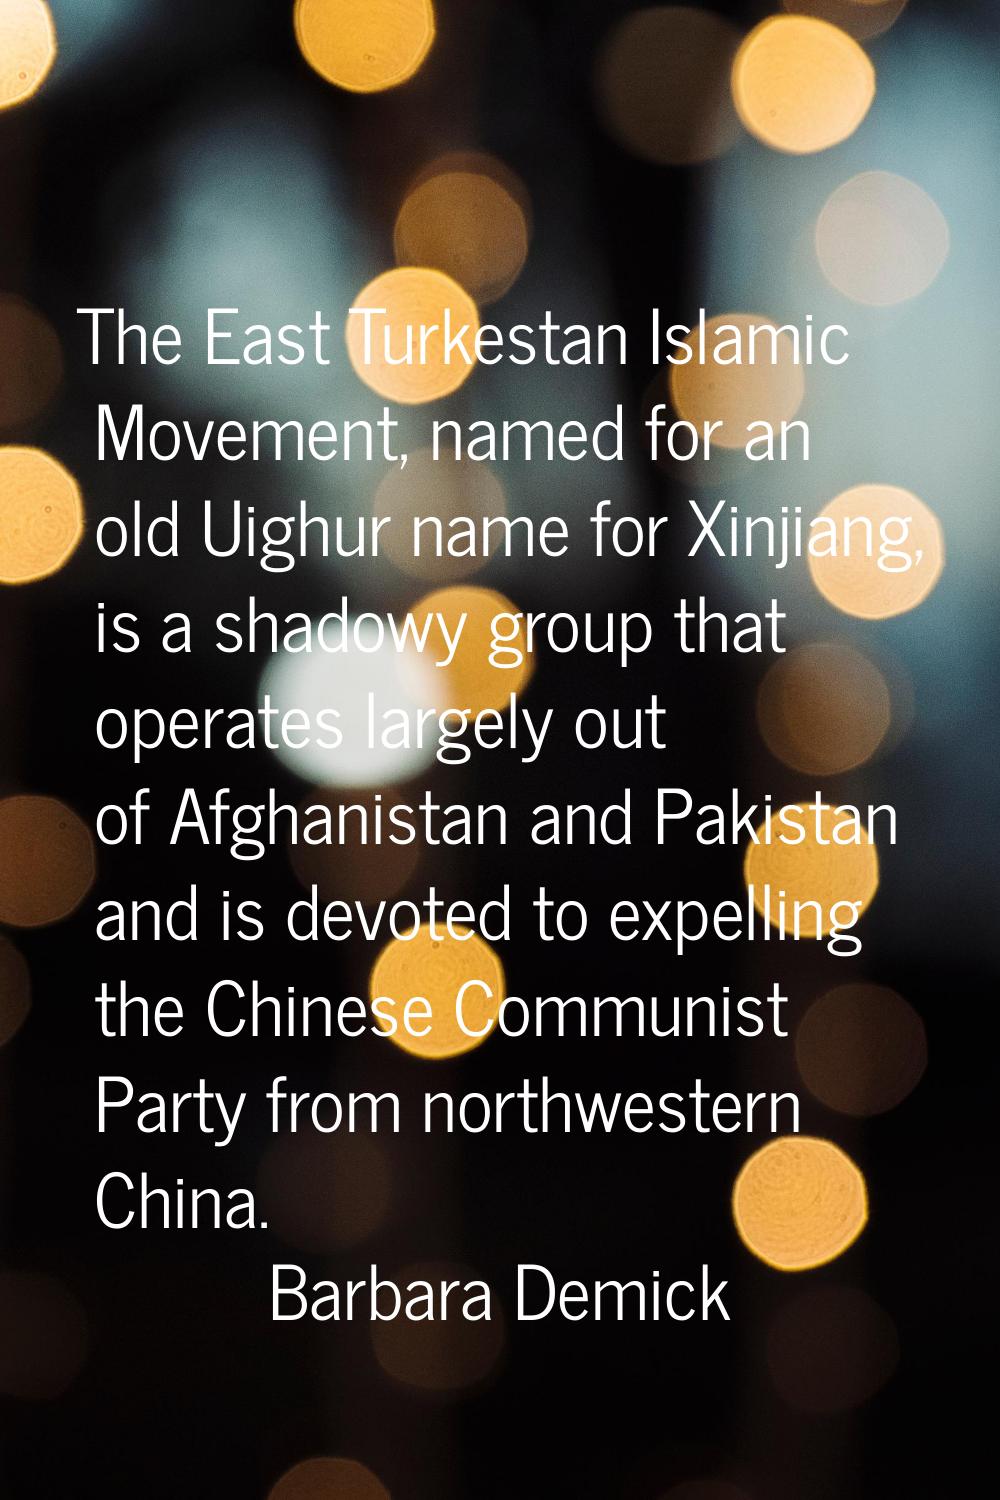 The East Turkestan Islamic Movement, named for an old Uighur name for Xinjiang, is a shadowy group 